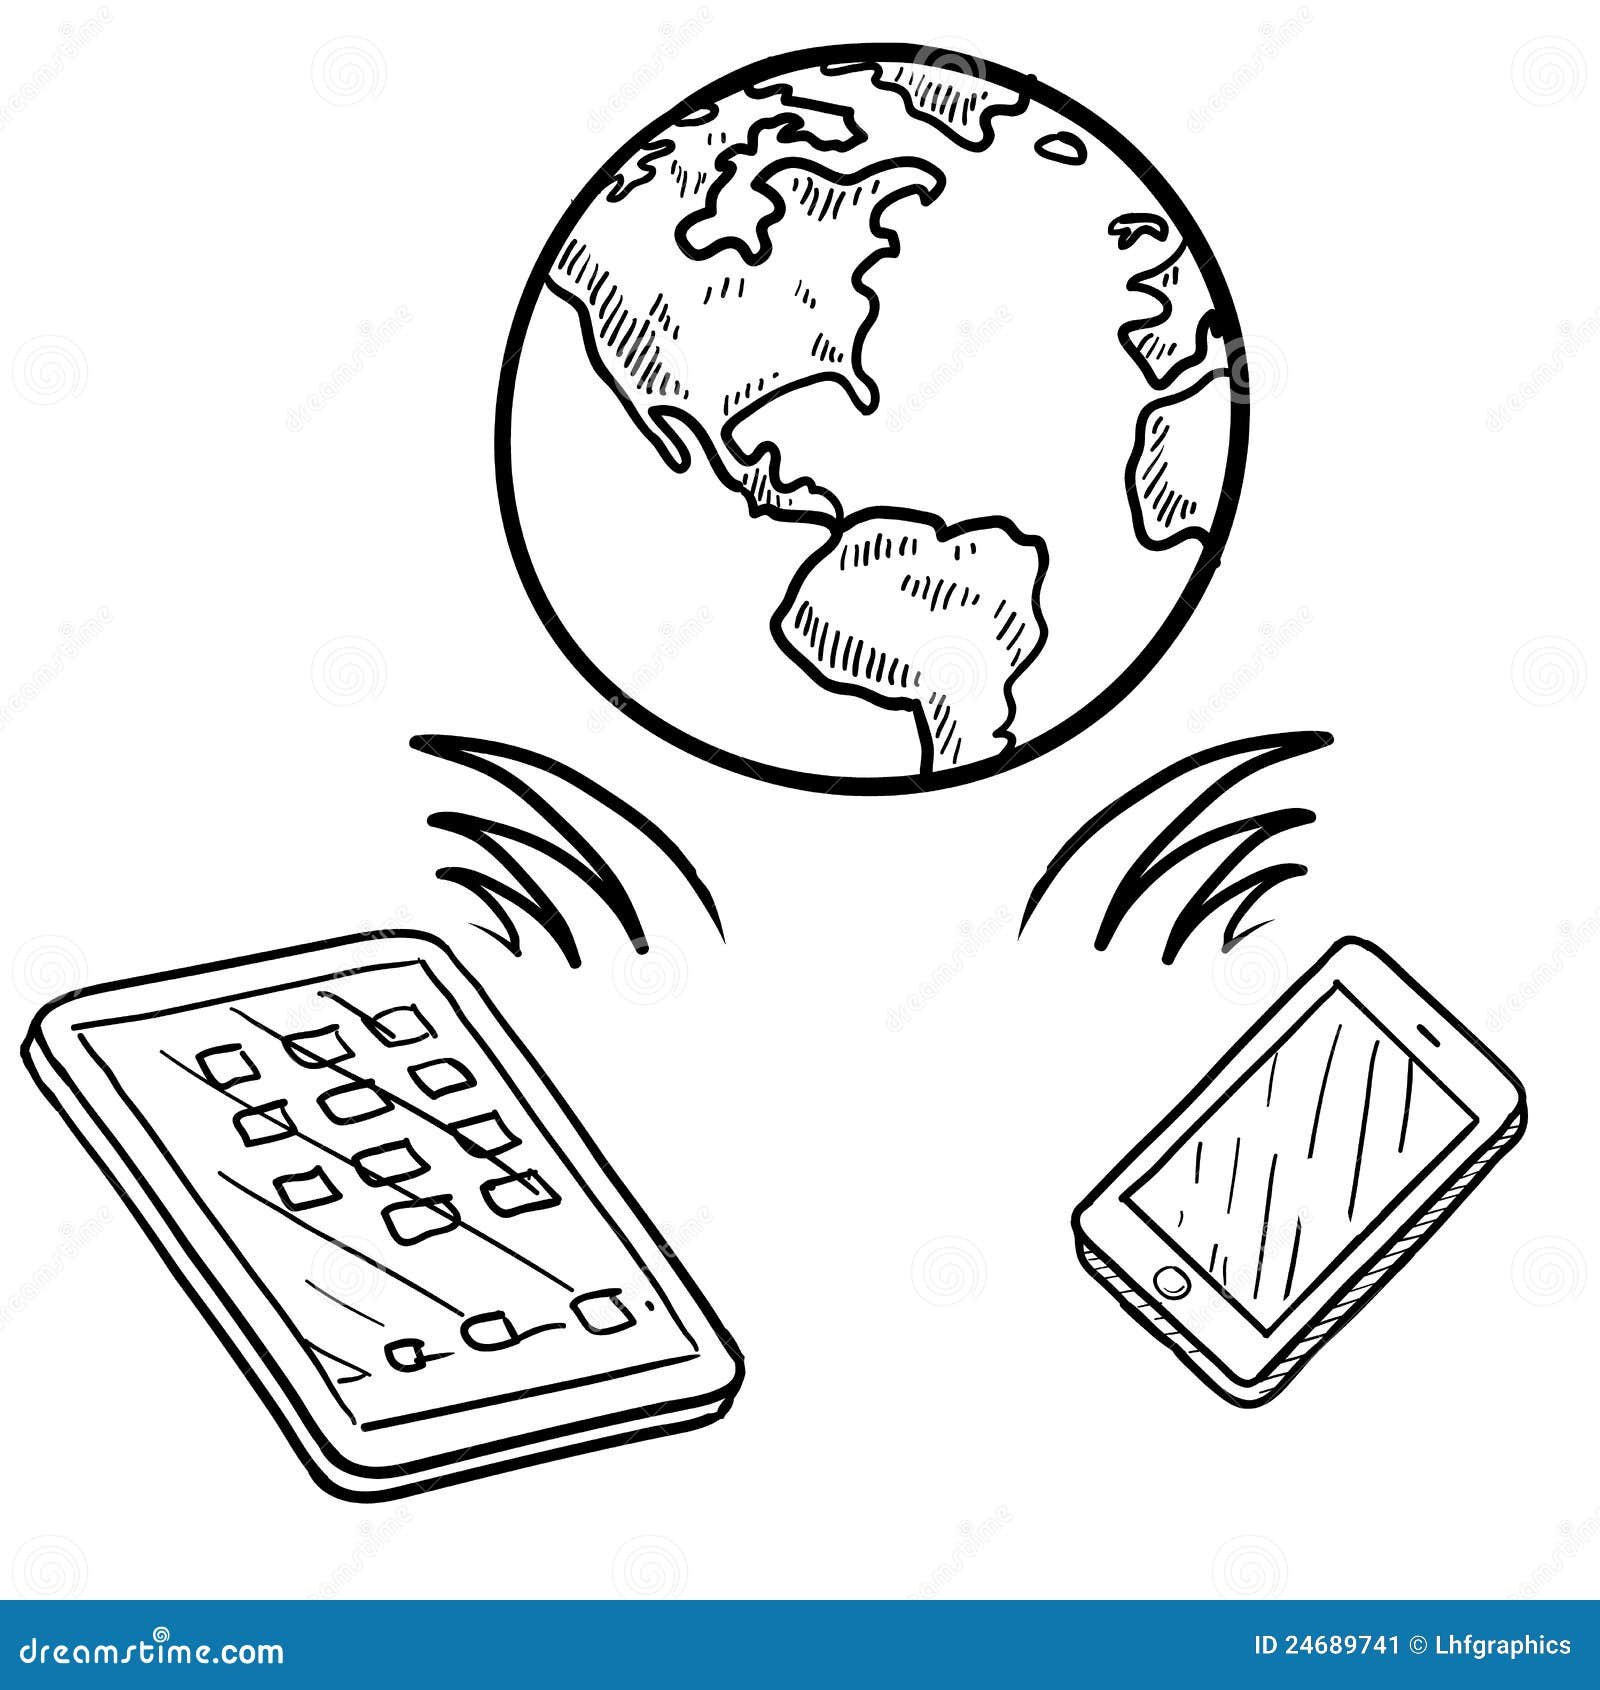 Communication Icons Set Hand Drawing Sketch Stock Vector Royalty Free  99450335  Shutterstock